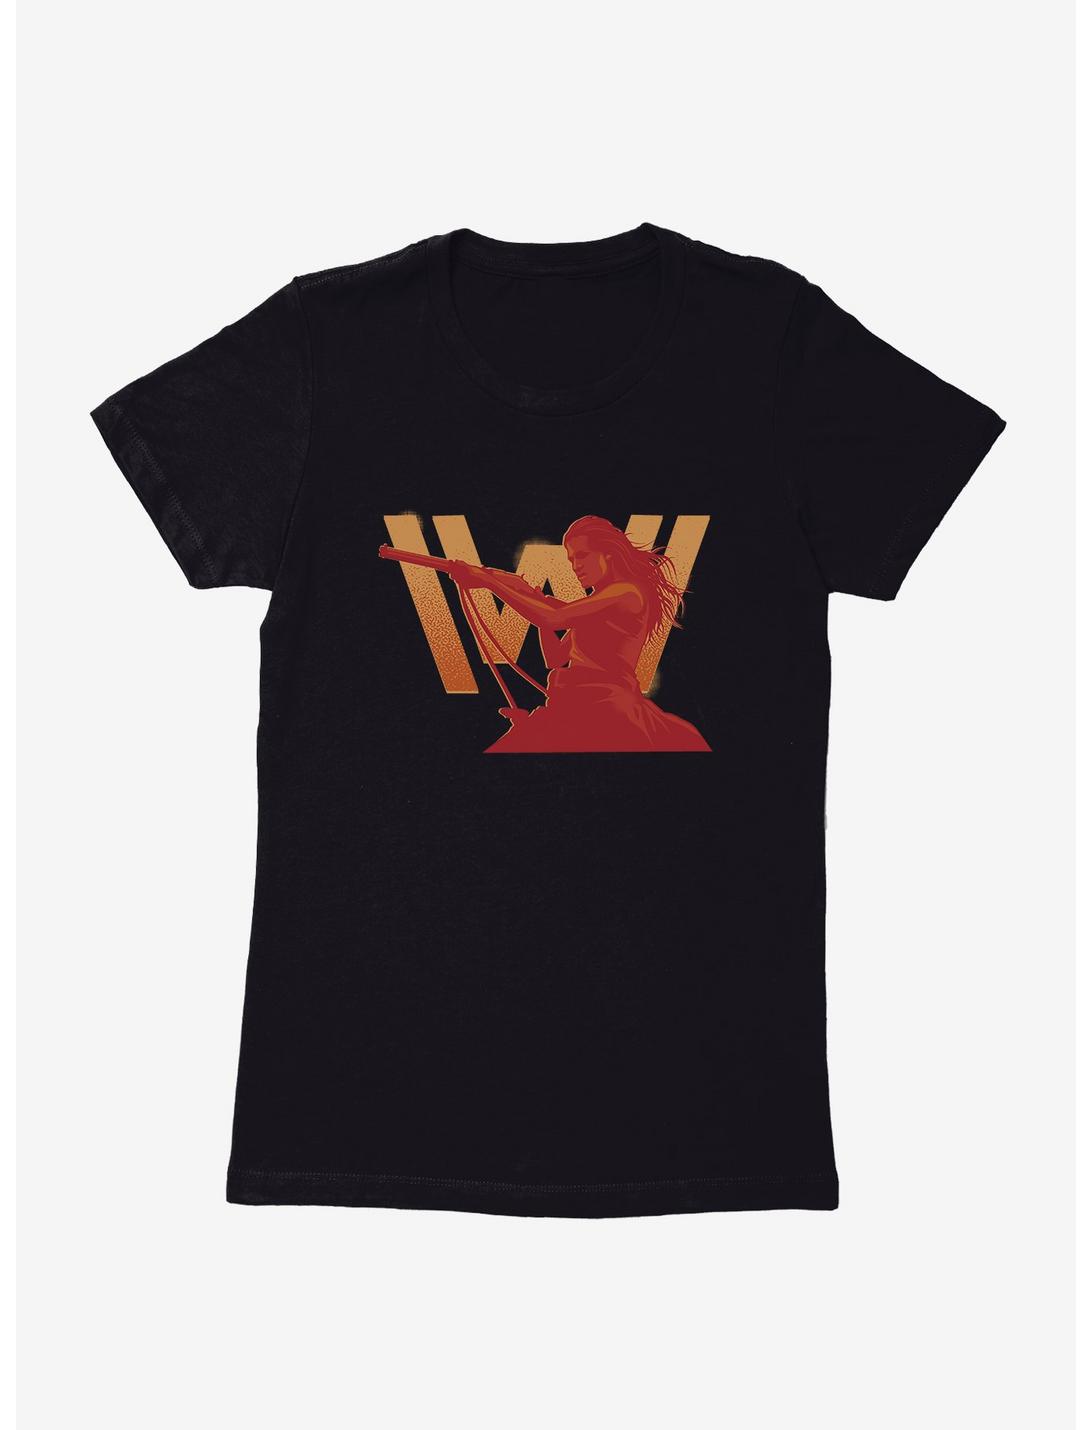 Westworld Protect Your Own Womens T-Shirt, BLACK, hi-res